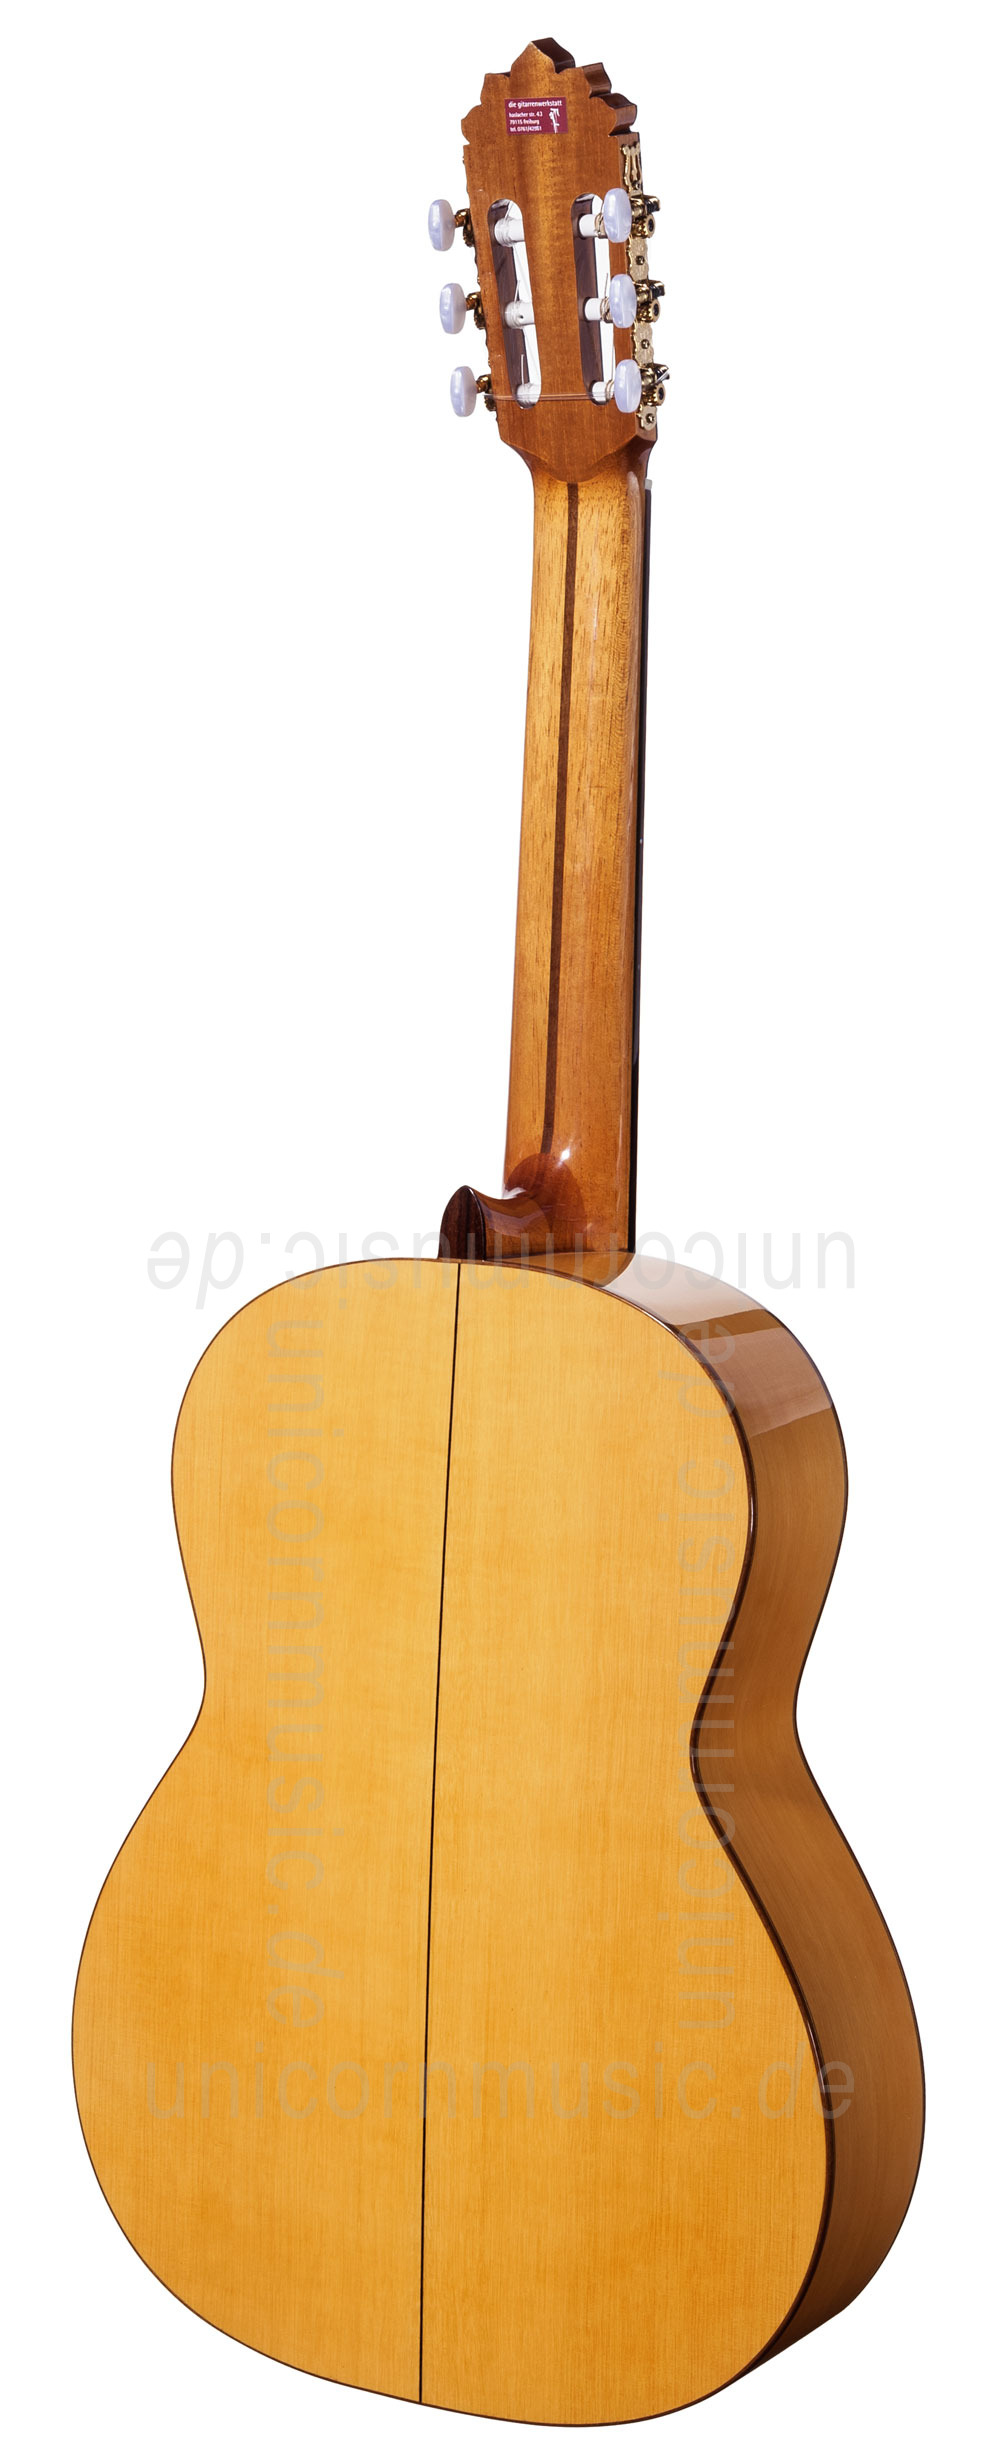 to article description / price Spanish Flamenco Guitar JOAN CASHIMIRA MODEL 102 - solid spruce top - cypress